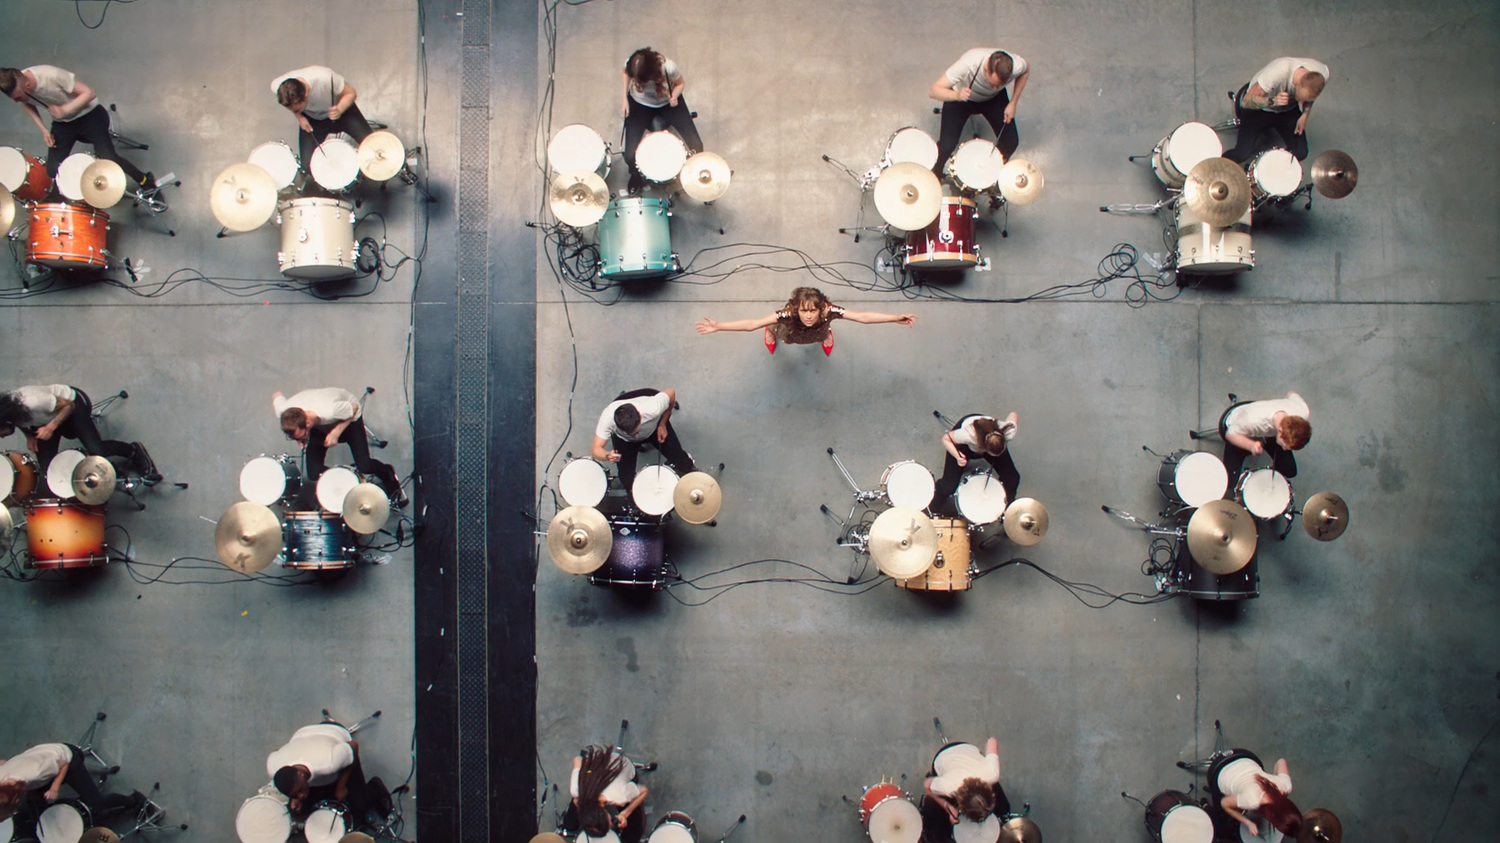 Gabrielle Alpin - "Sweet Nothing" overhead shot of drummers